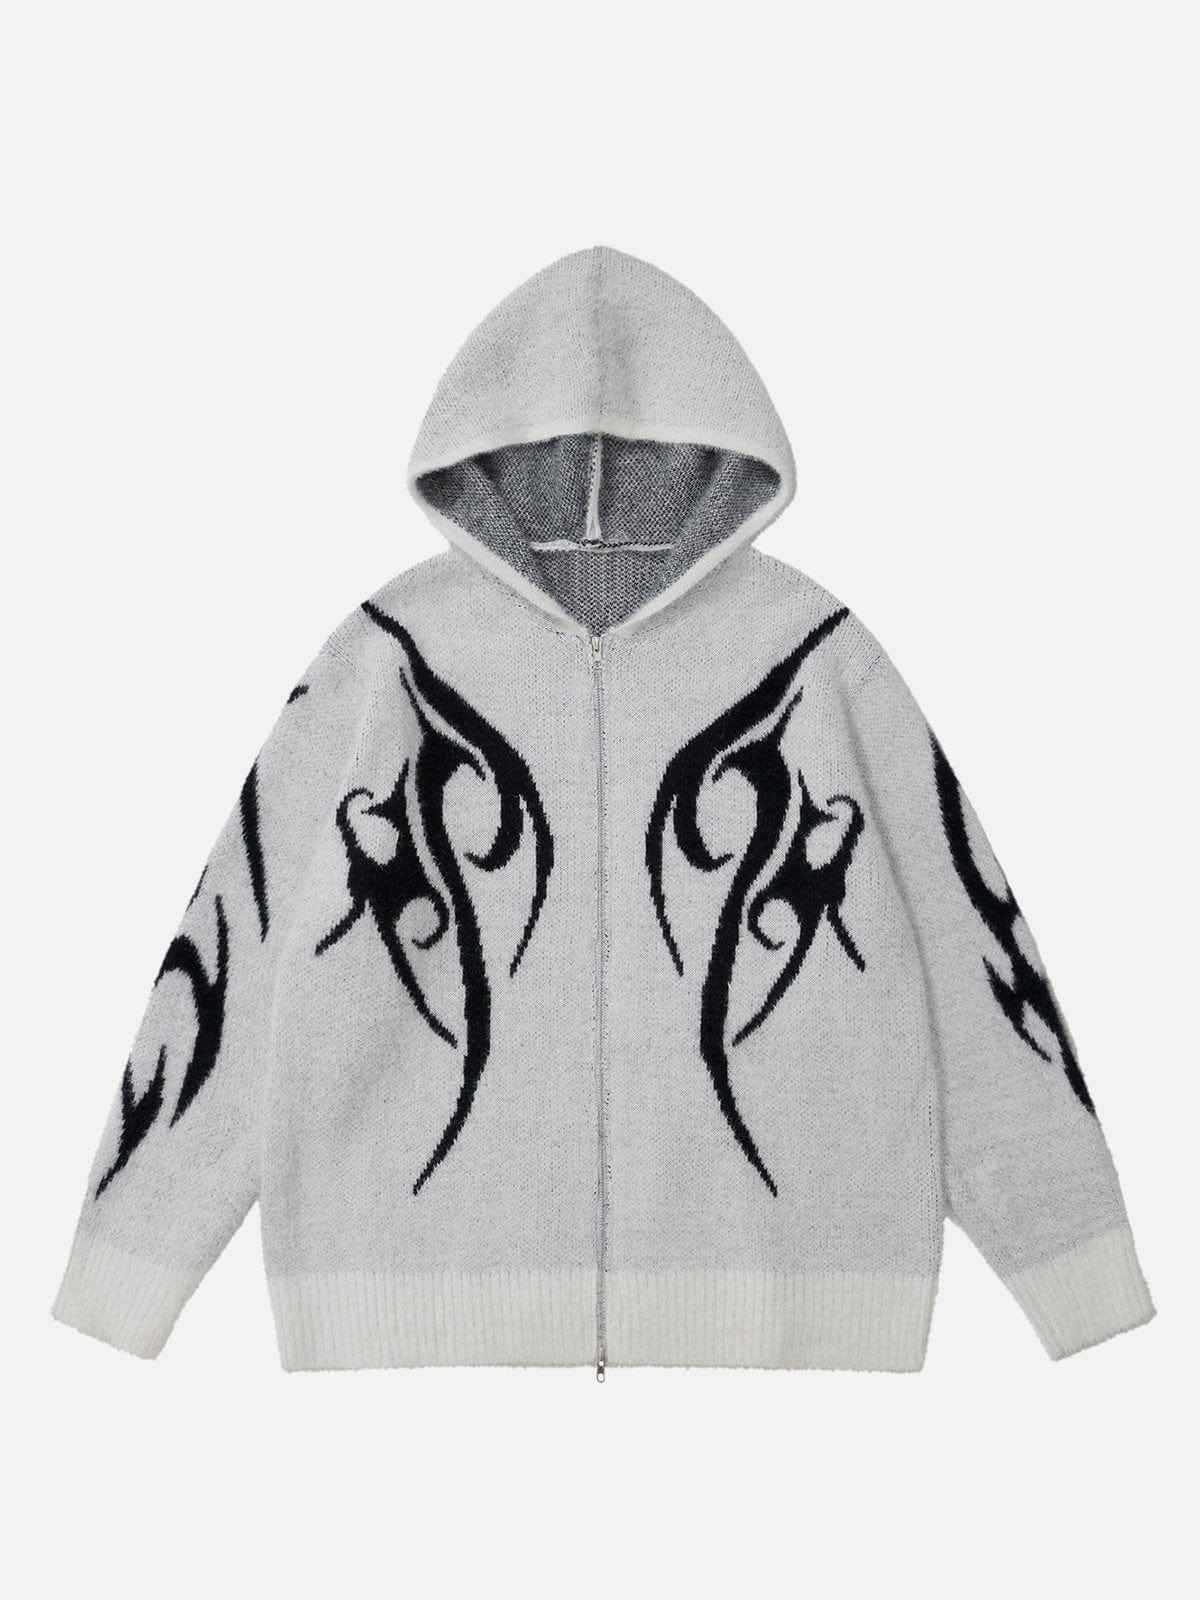 NEV Flame Graphic Sweater Hoodie